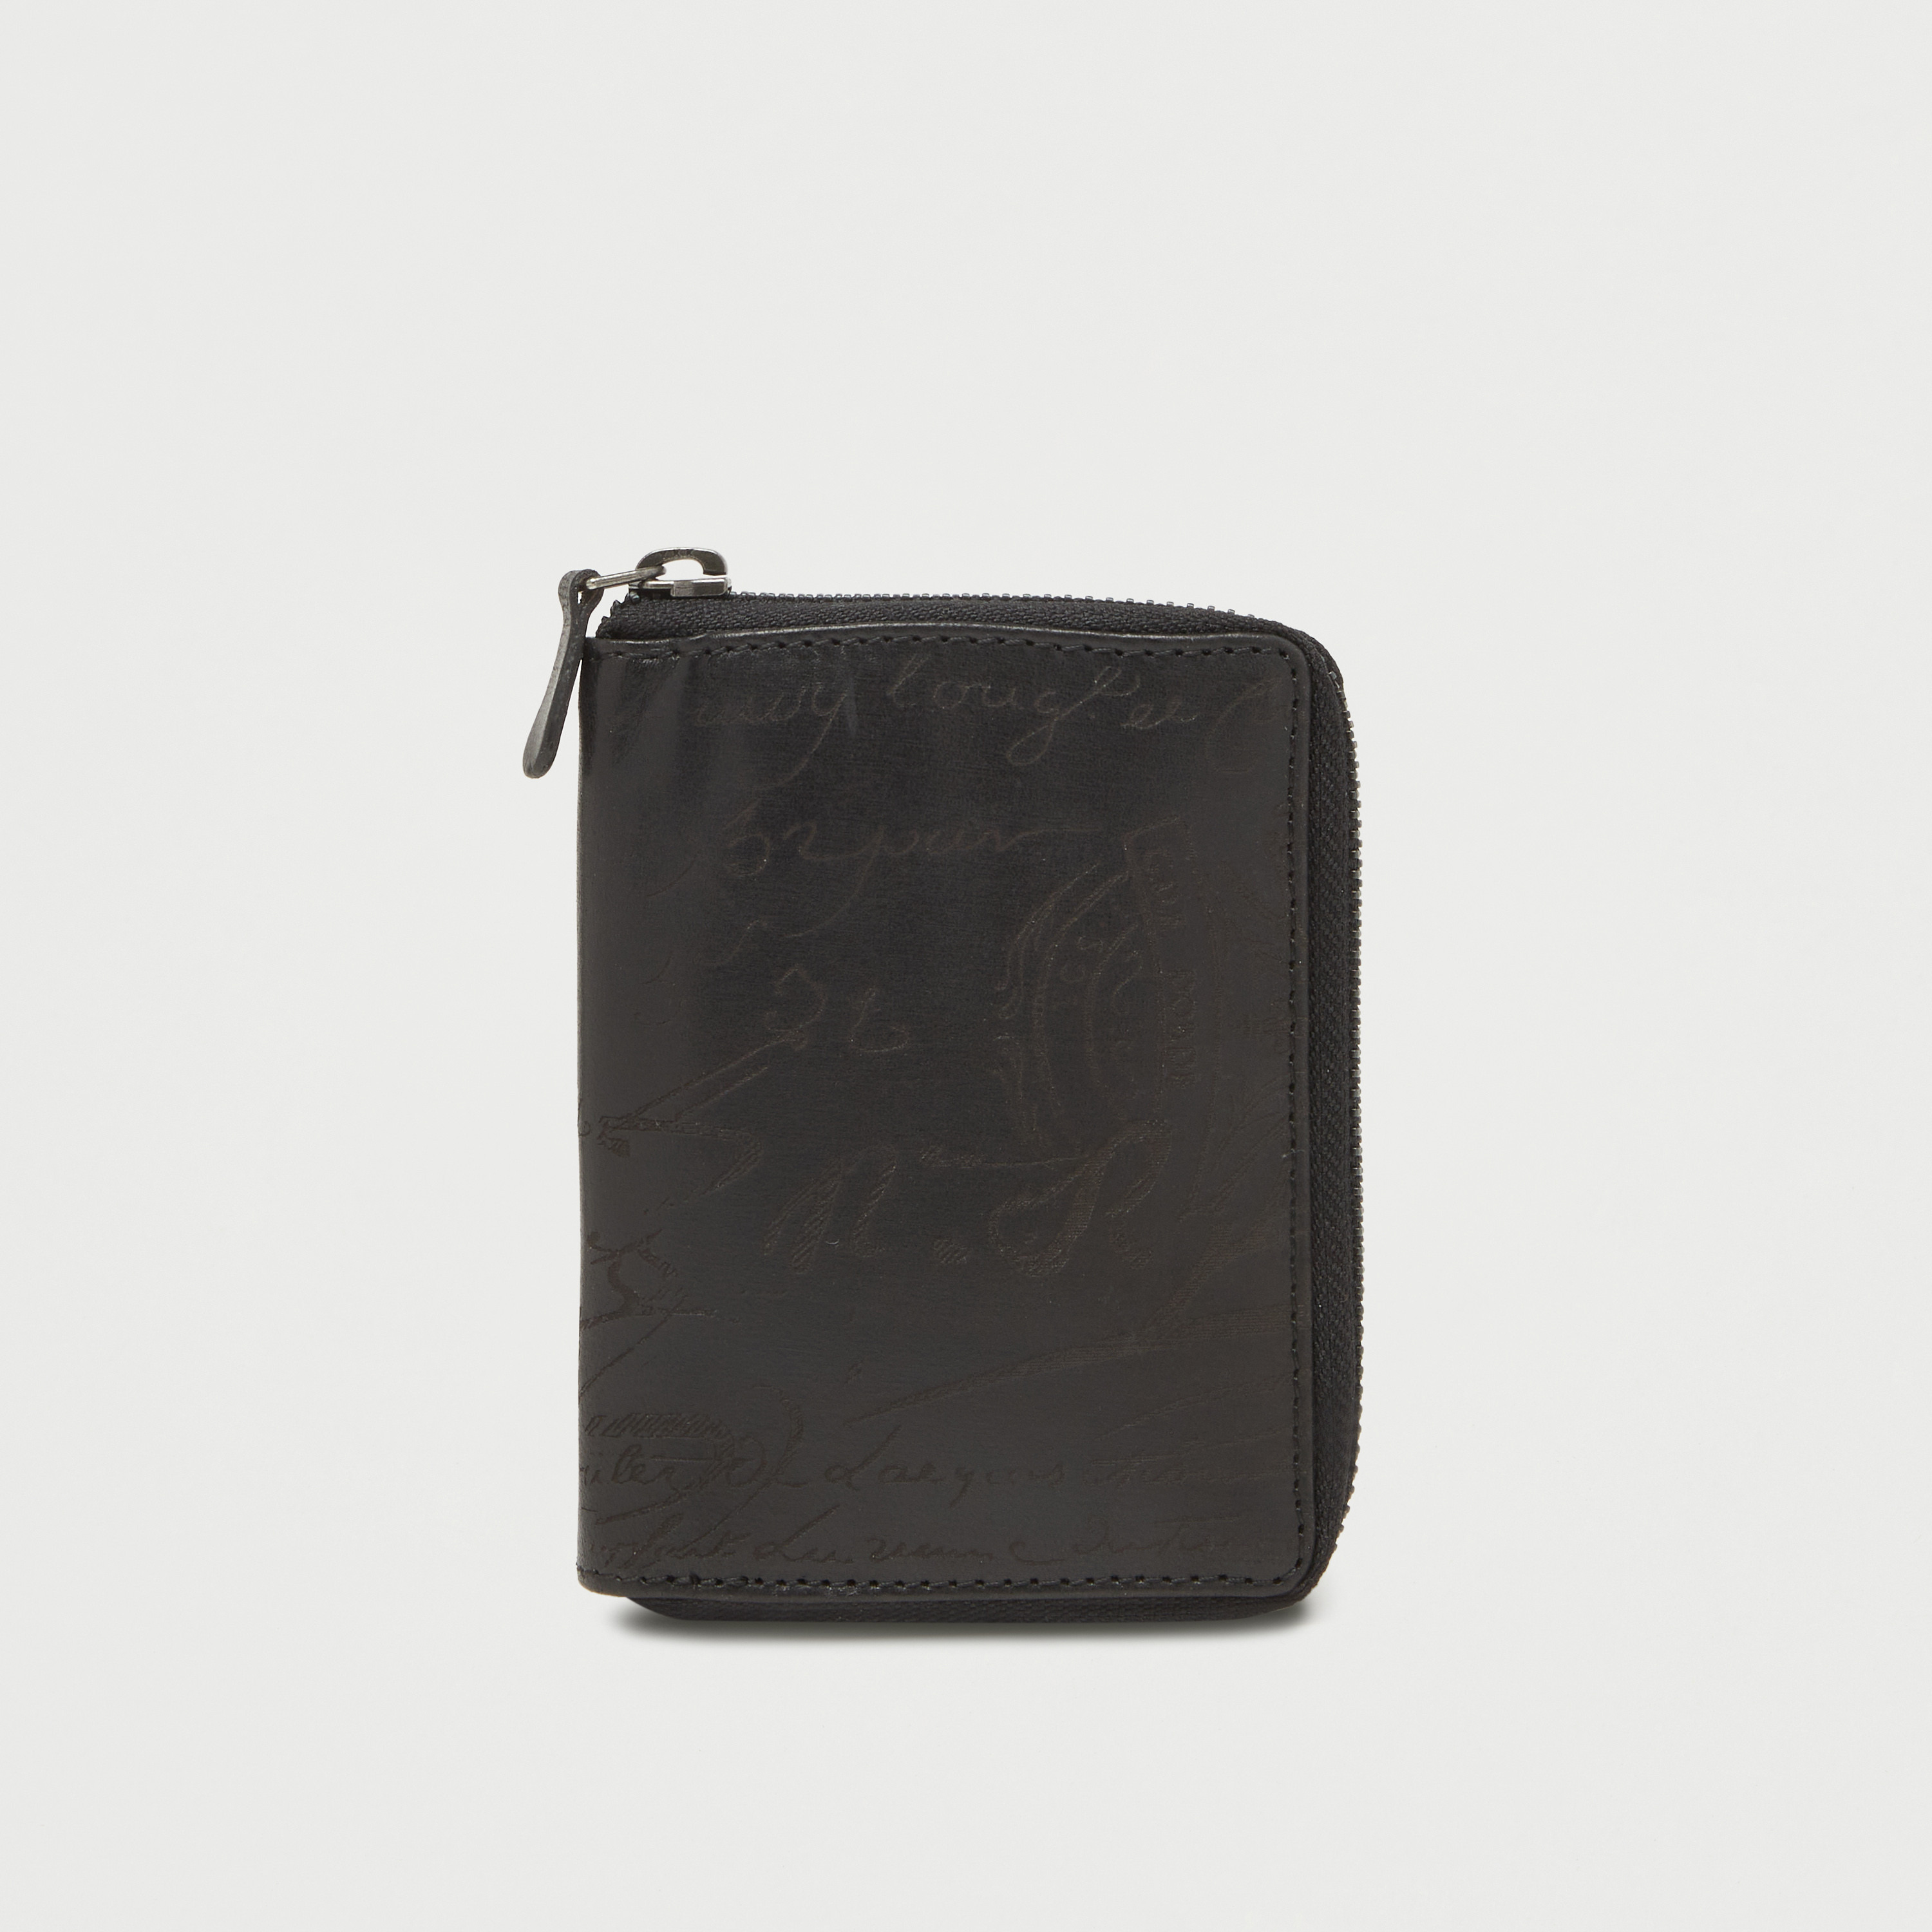 Lee Cooper Tan Casual Short Wallet: Buy Online at Low Price in India -  Snapdeal